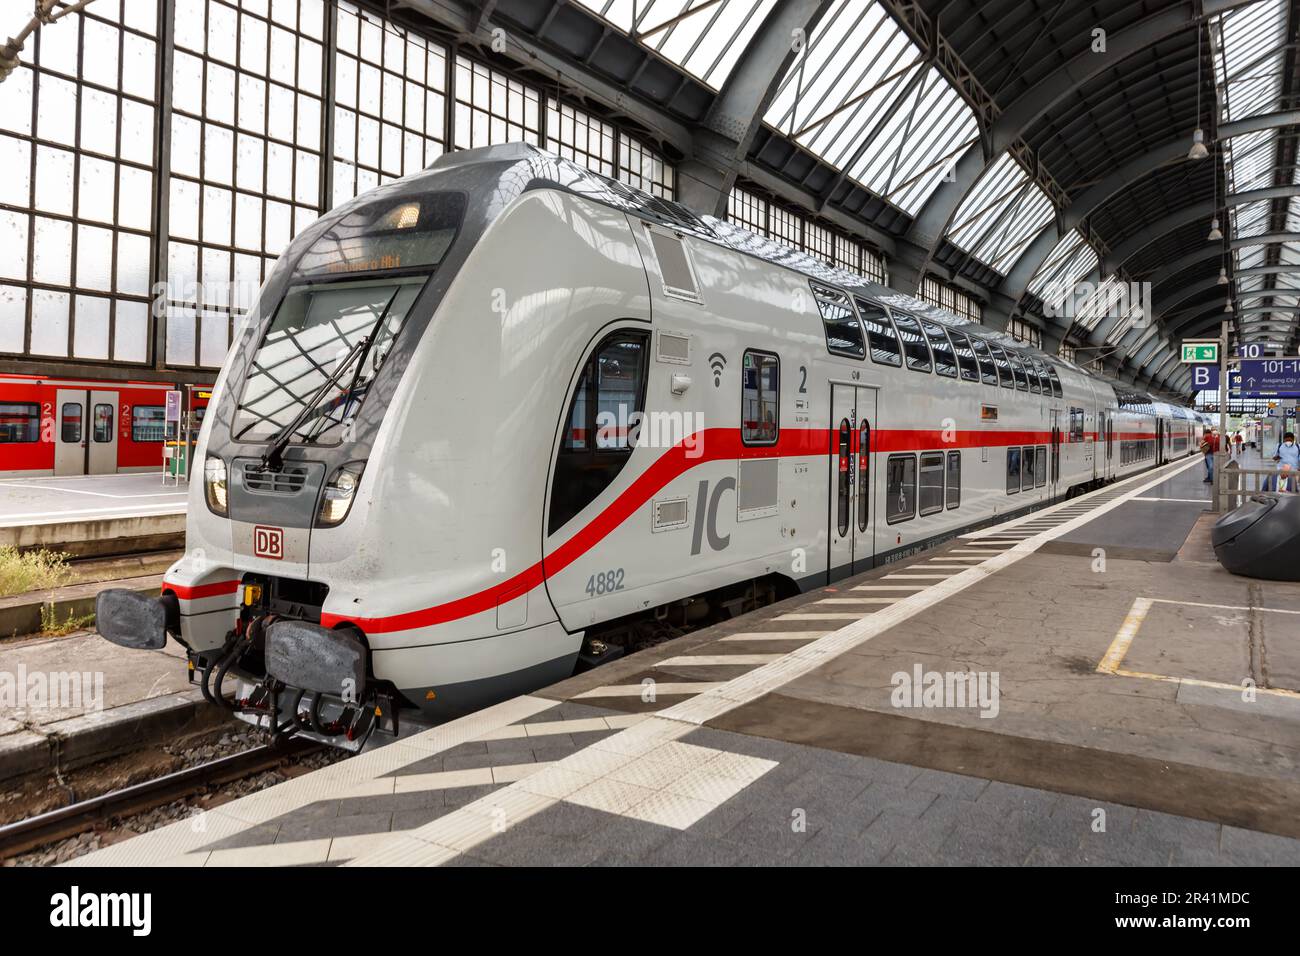 InterCity IC train of the type Twindexx Vario from Bombardier of DB  Deutsche Bahn in Karlsruhe main station, Germany Stock Photo - Alamy